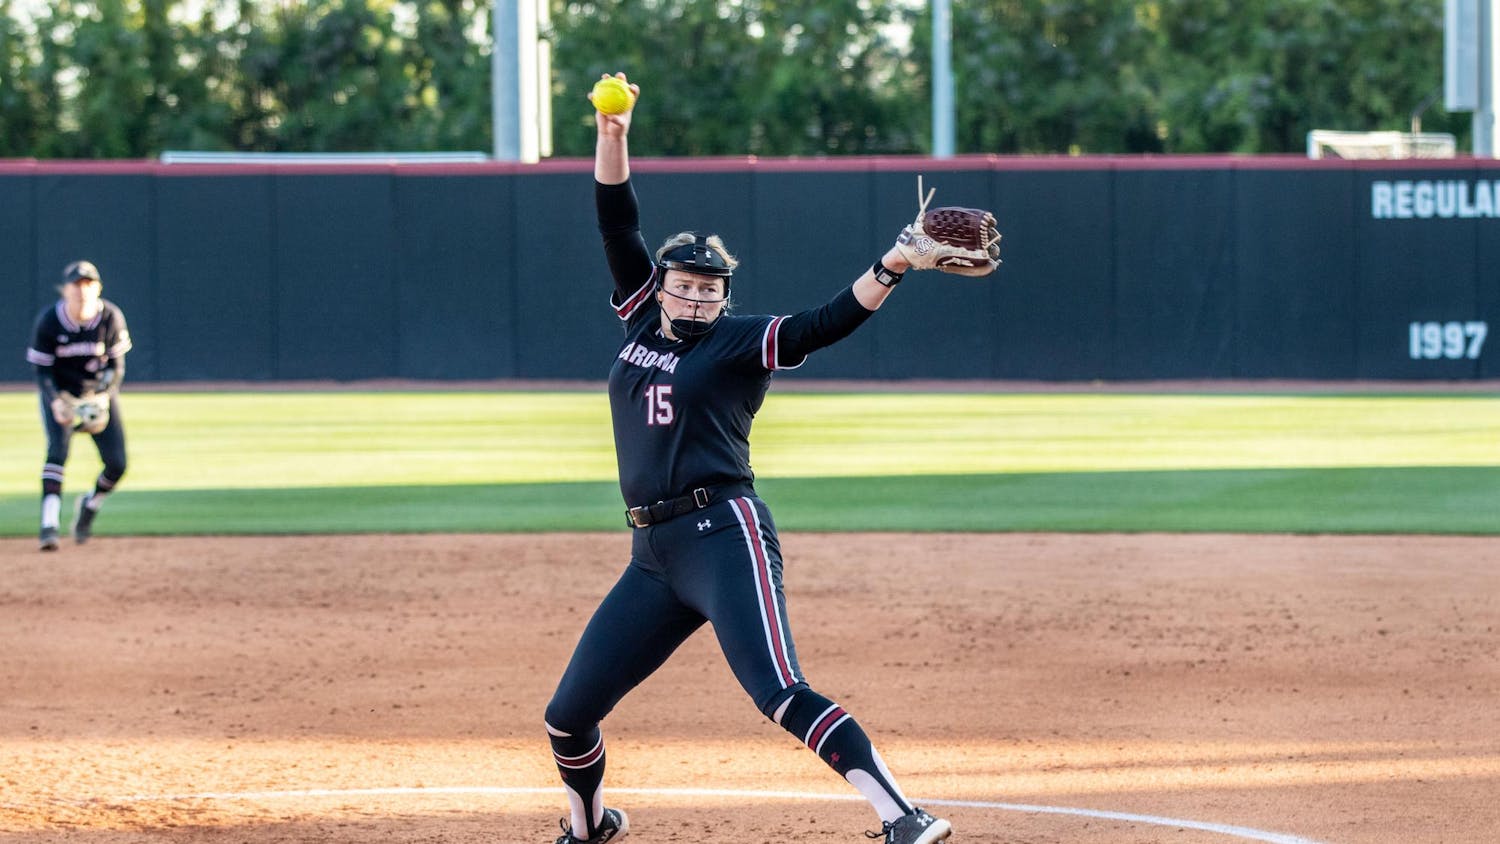 Fifth-year pitcher Alana Vawter winds up a pitch during South Carolina's game against Arkansas at Beckham Field on April 12, 2024. Vawter faced 29 batters in the ɫɫƵs' 4-3 loss to the Razorbacks.